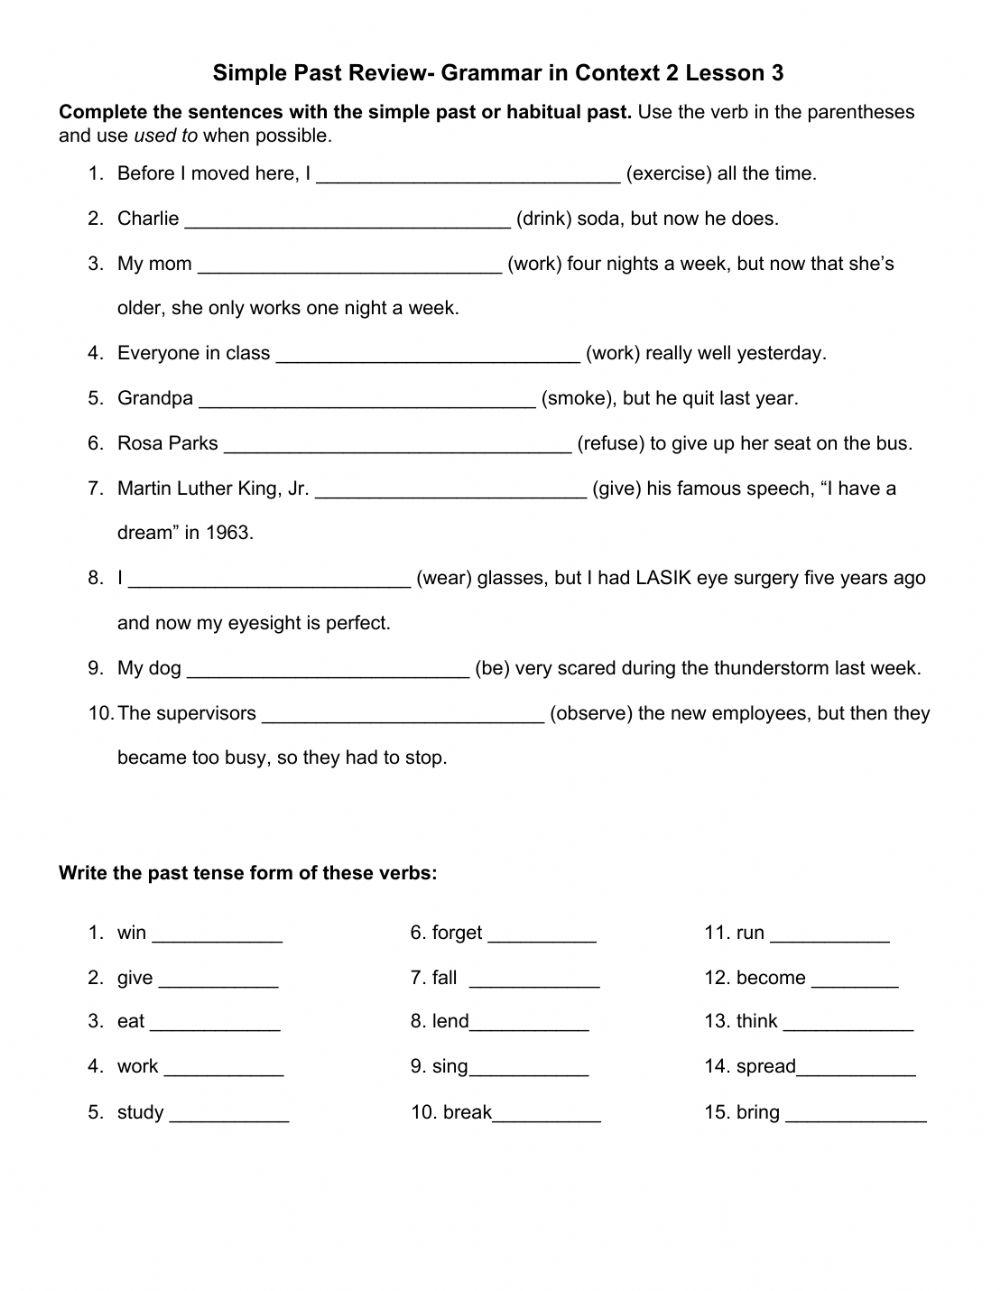 simple-past-and-habitual-past-review-worksheet-live-worksheets